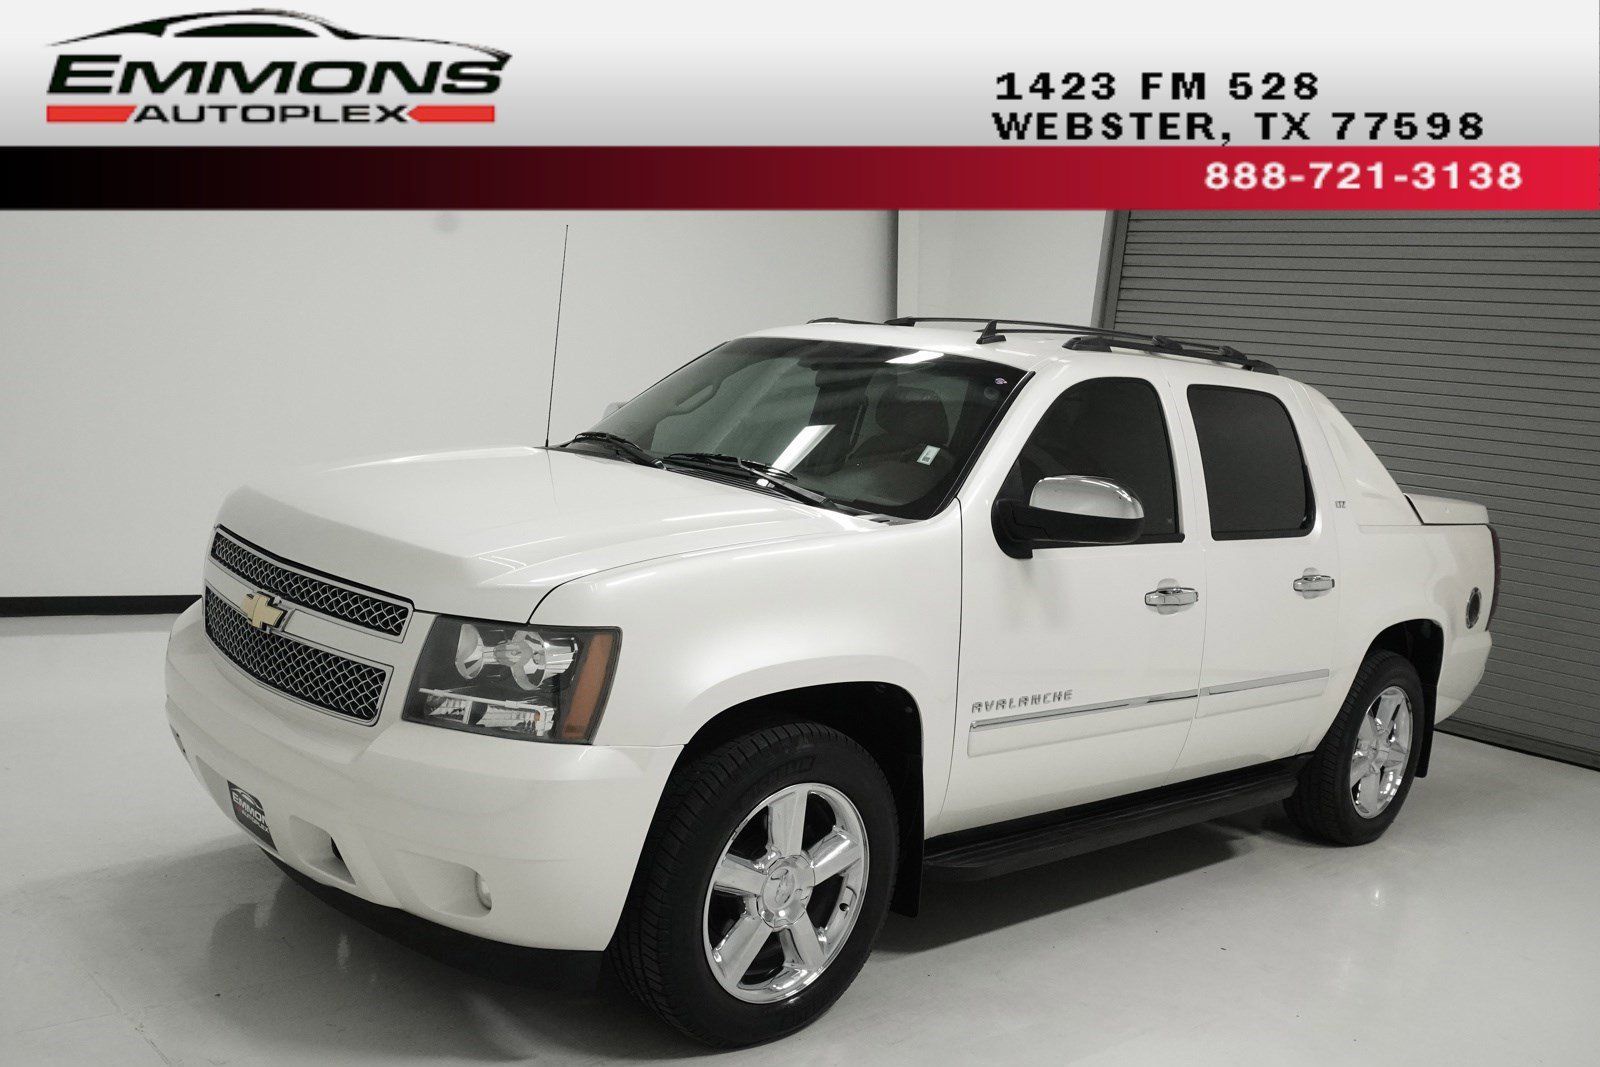 Used 2011 Chevrolet Avalanche